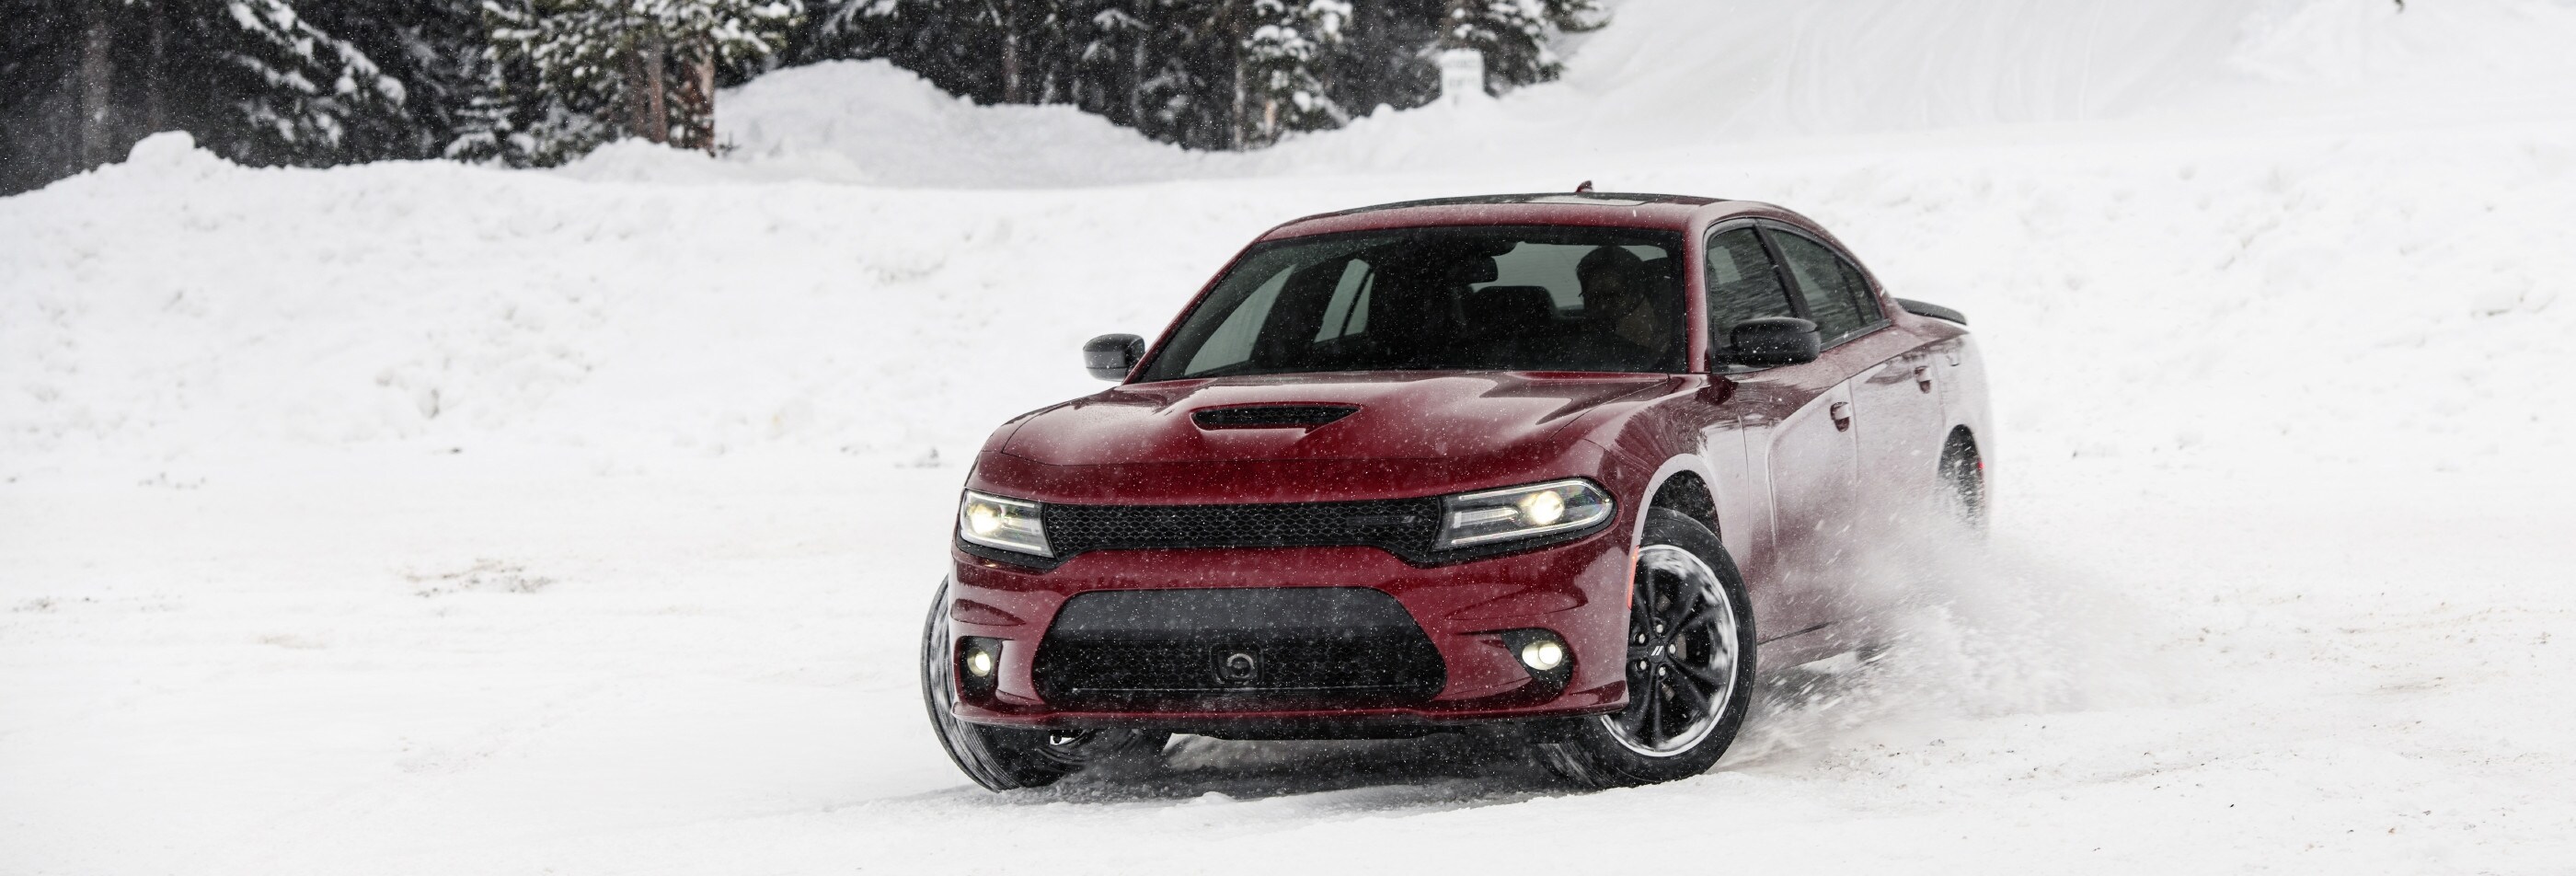 New Dodge Inventory For Sale in Whitehorse, YT